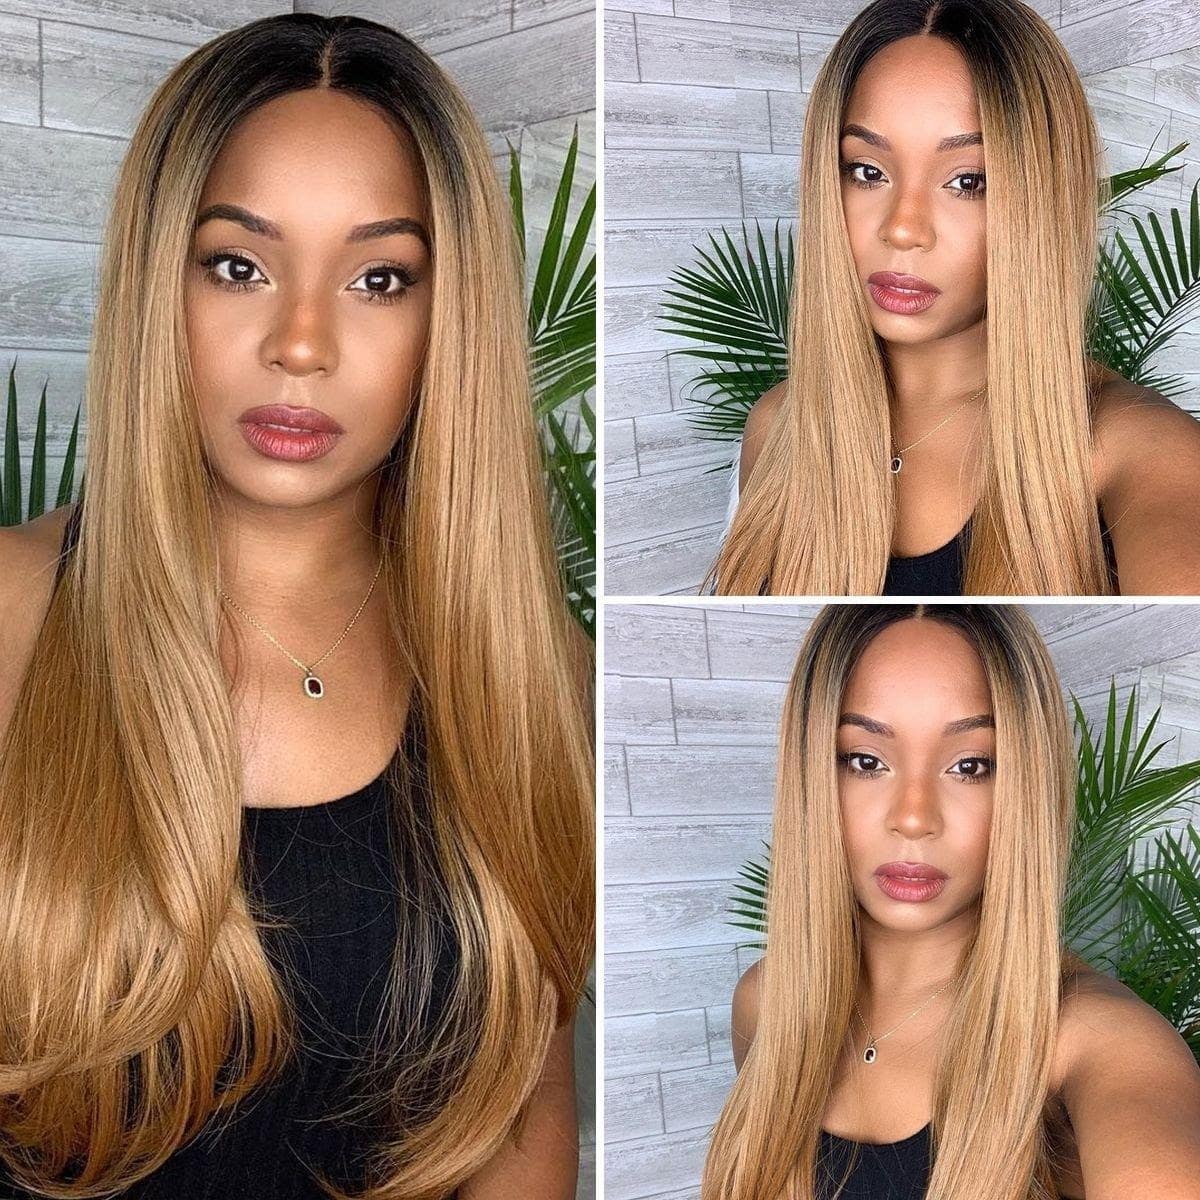 Searching for human hair wigs? Find out how to tell the difference between a human hair wig and a synthetic wig. Here's exactly what to look for!